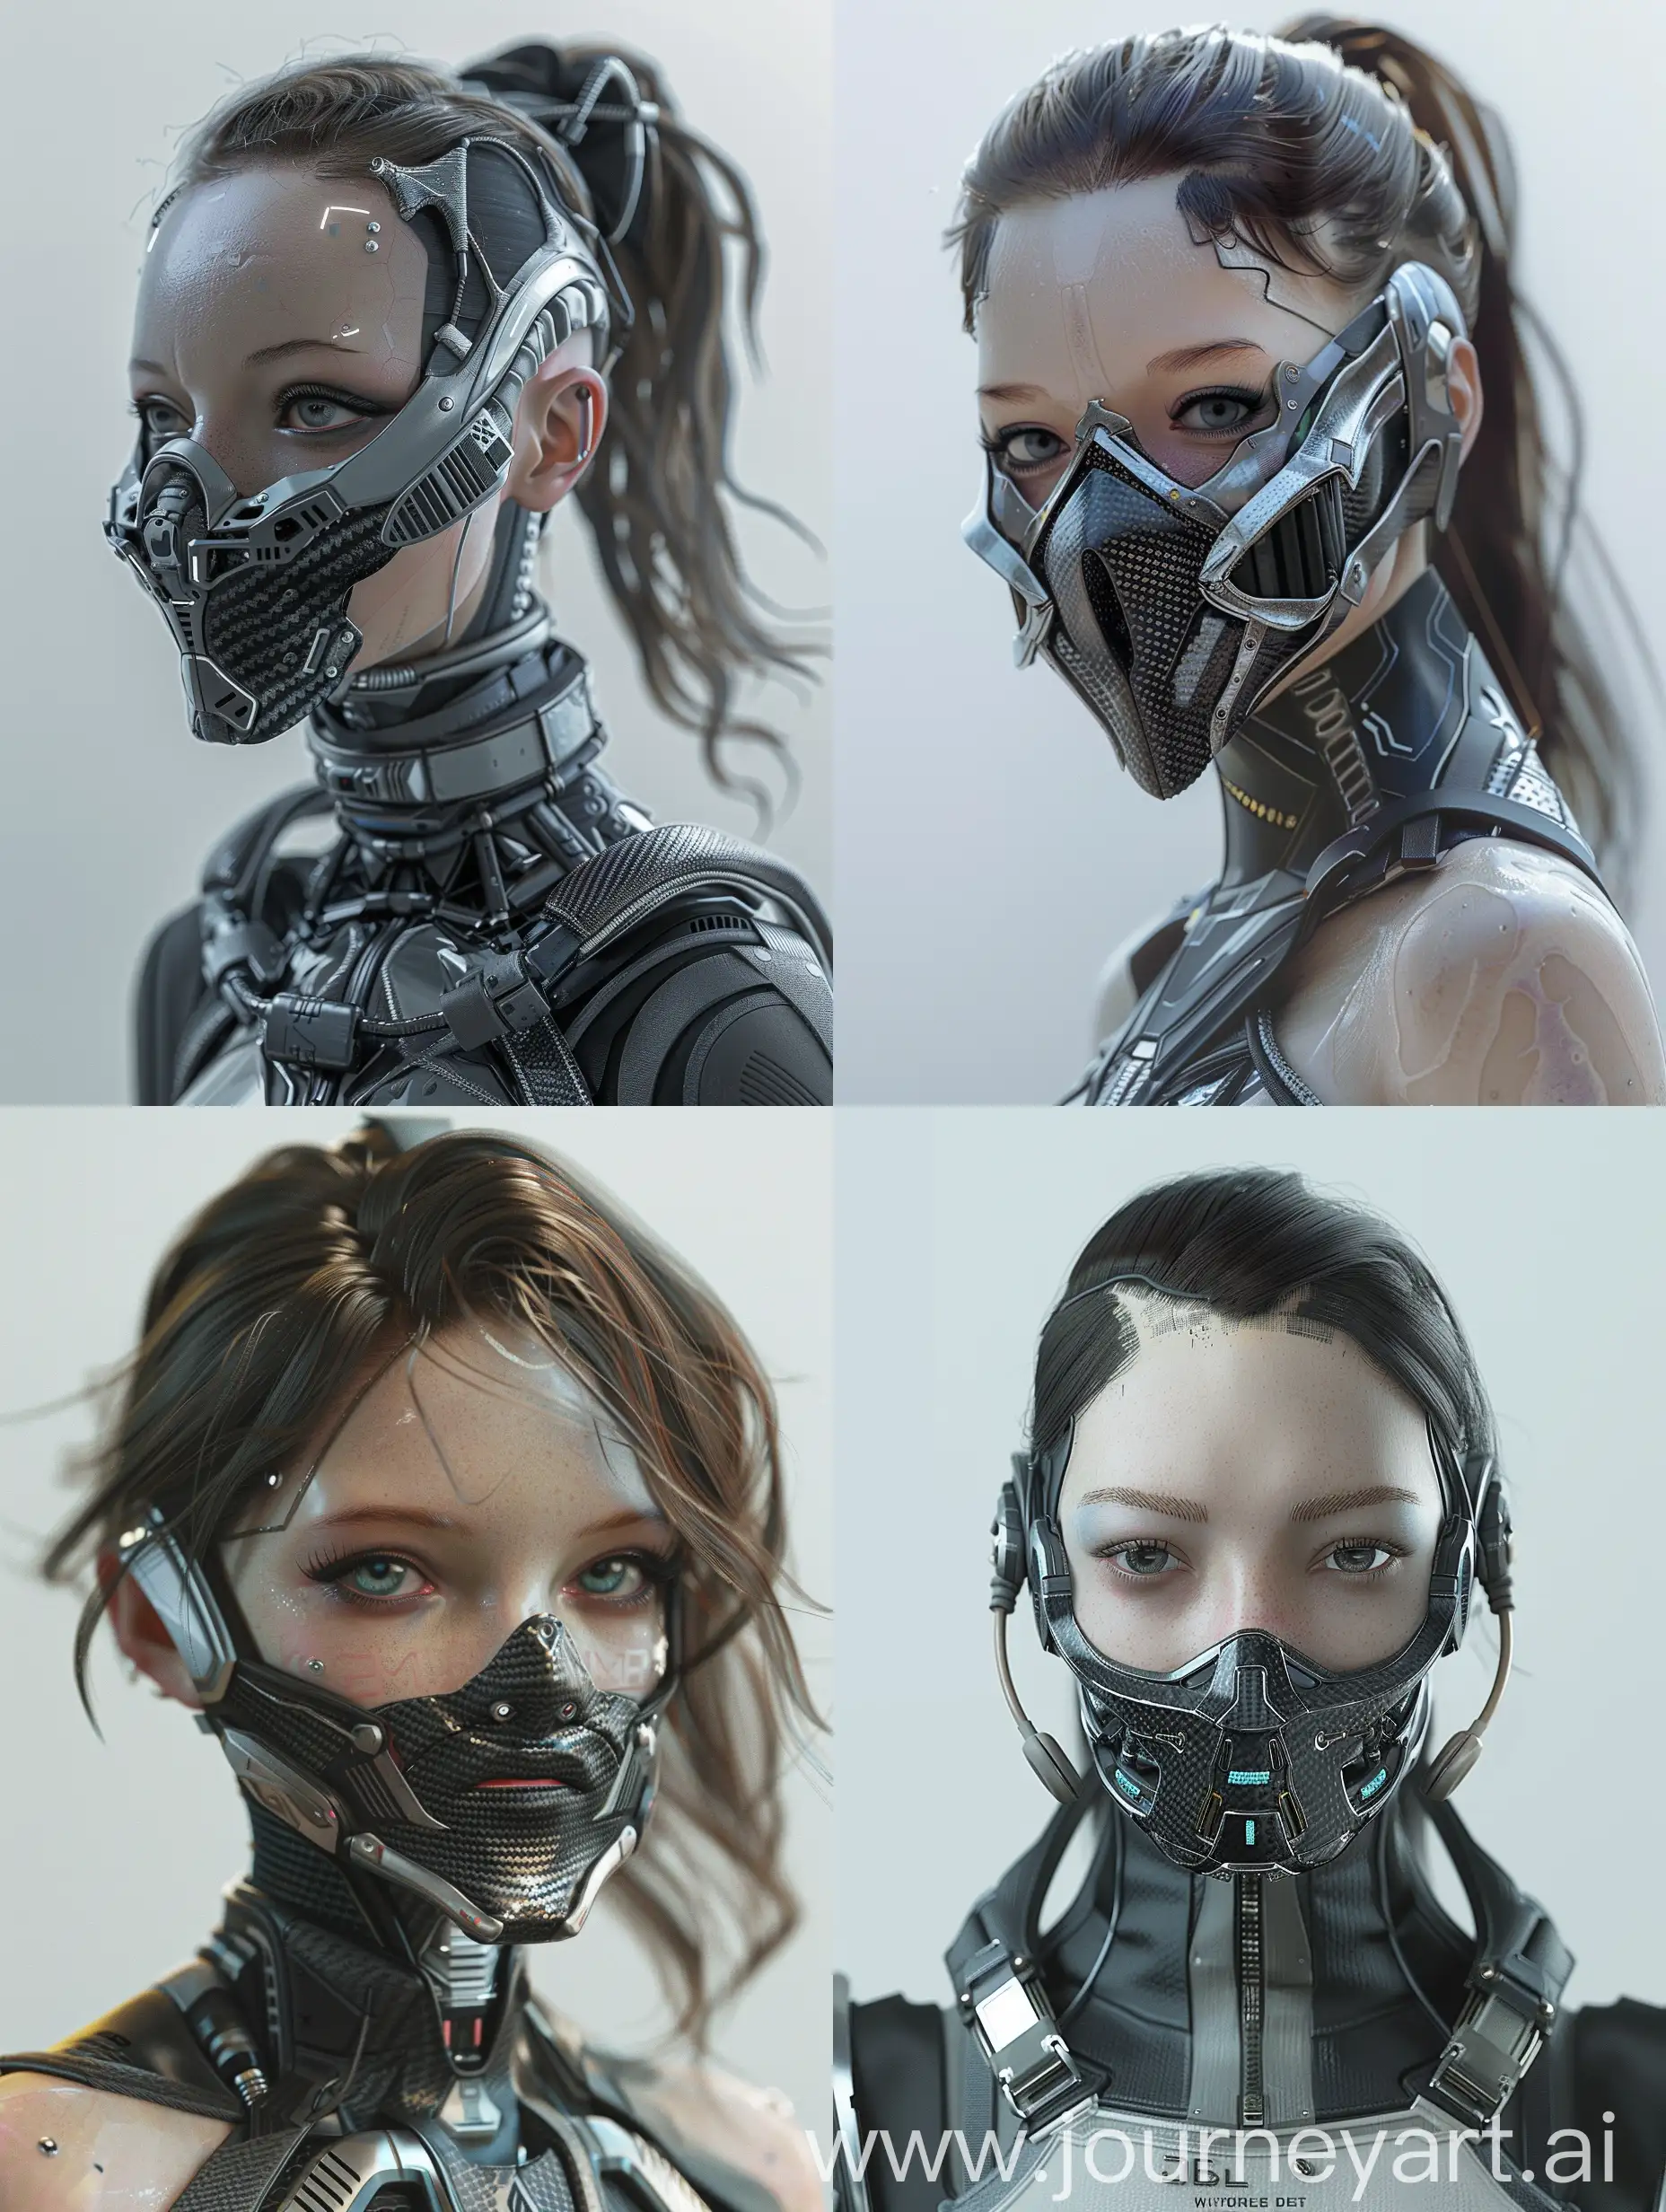 Futuristic-Cyberpunk-Character-with-Cybernetic-MouthMask-and-Carbon-Fiber-Aesthetics